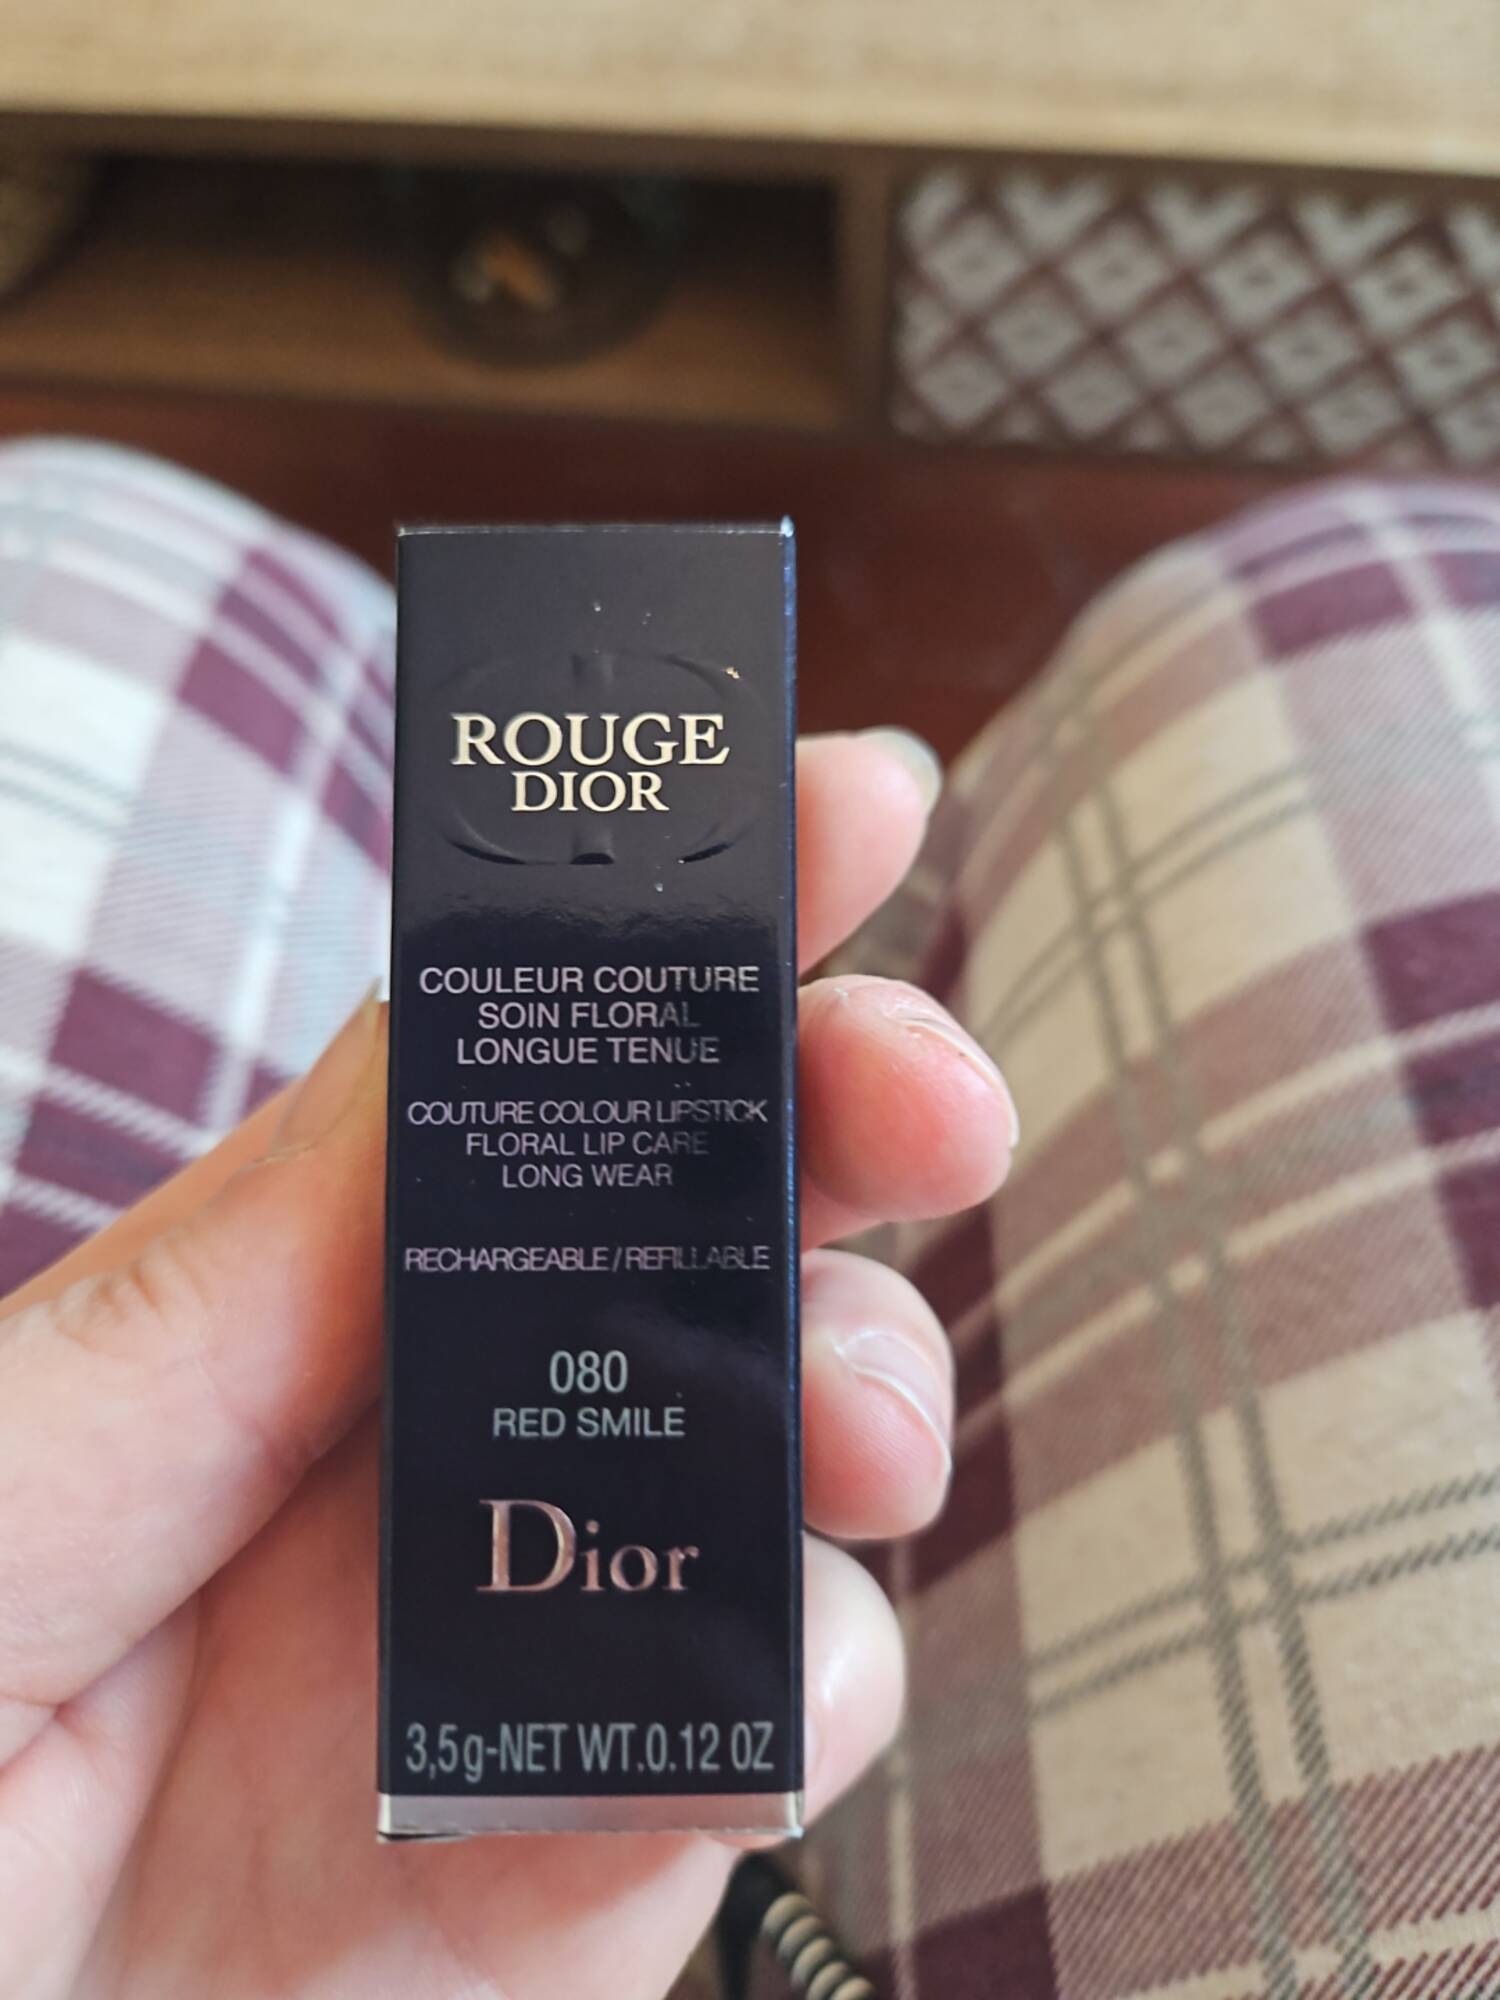 DIOR - Rouge dior - Couleur couture soin floral 080 red smile